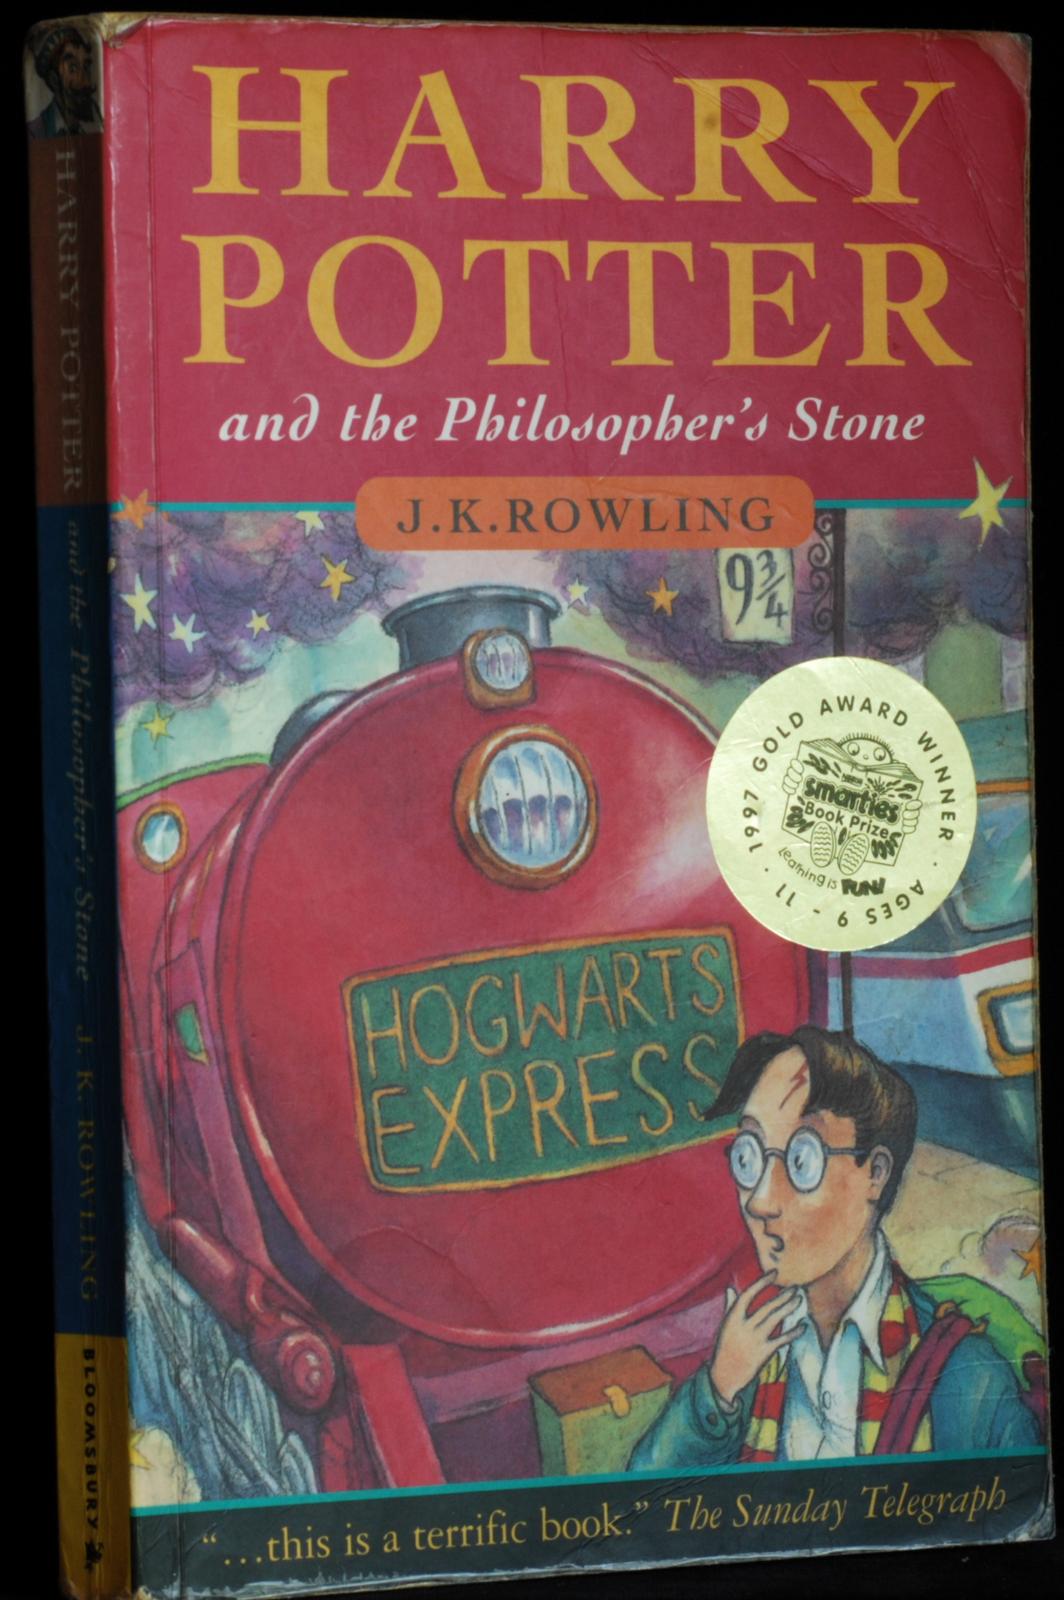 mbb005402b_-_Rowling_J_K_-_Harry_Potter_And_The_Philosopher_s_Stone.jpg